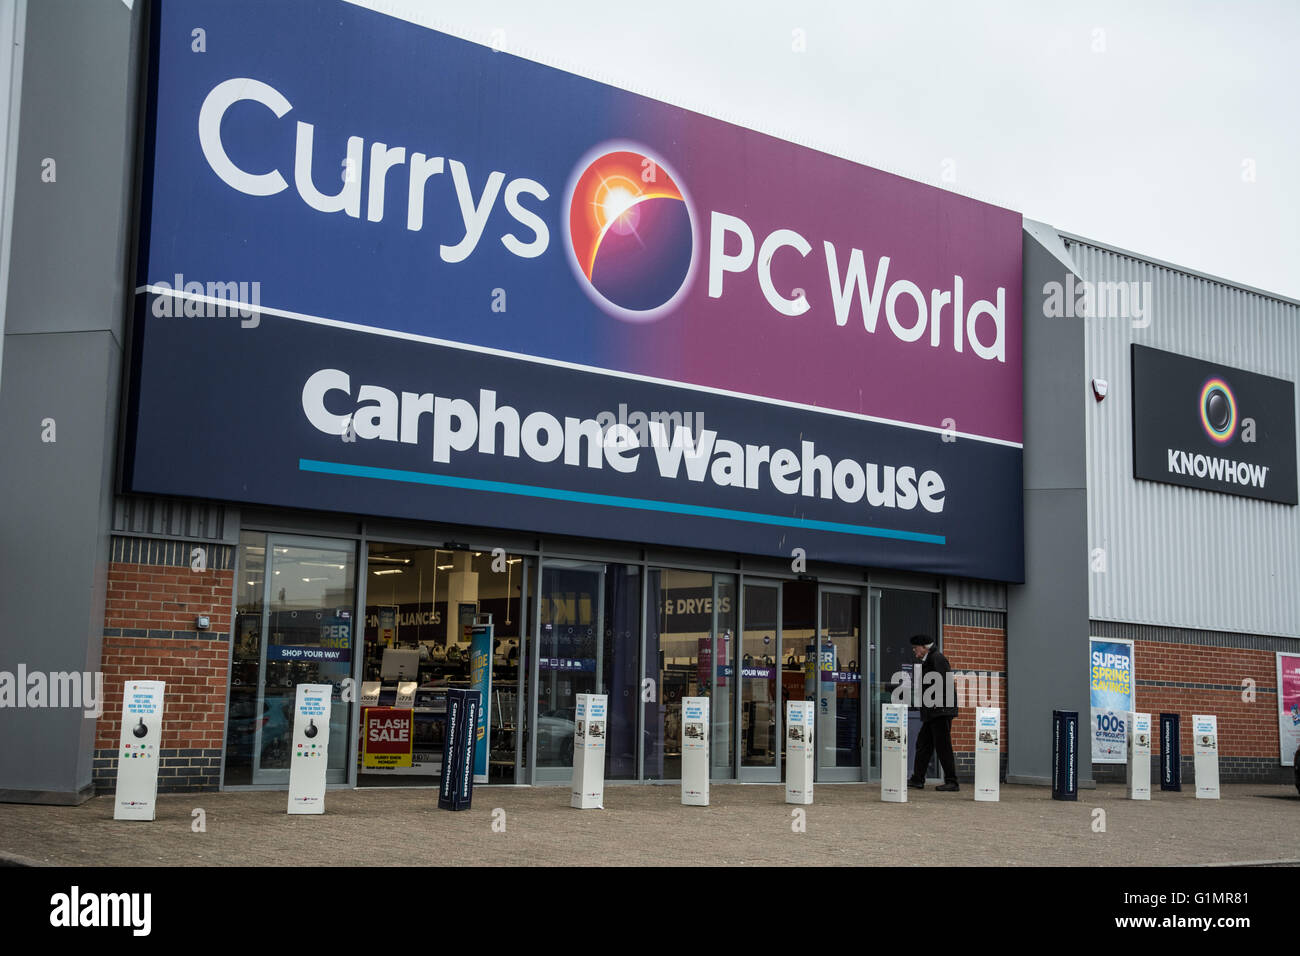 Currys PC World in Norwich, with a Carphone Warehouse inside. Stock Photo